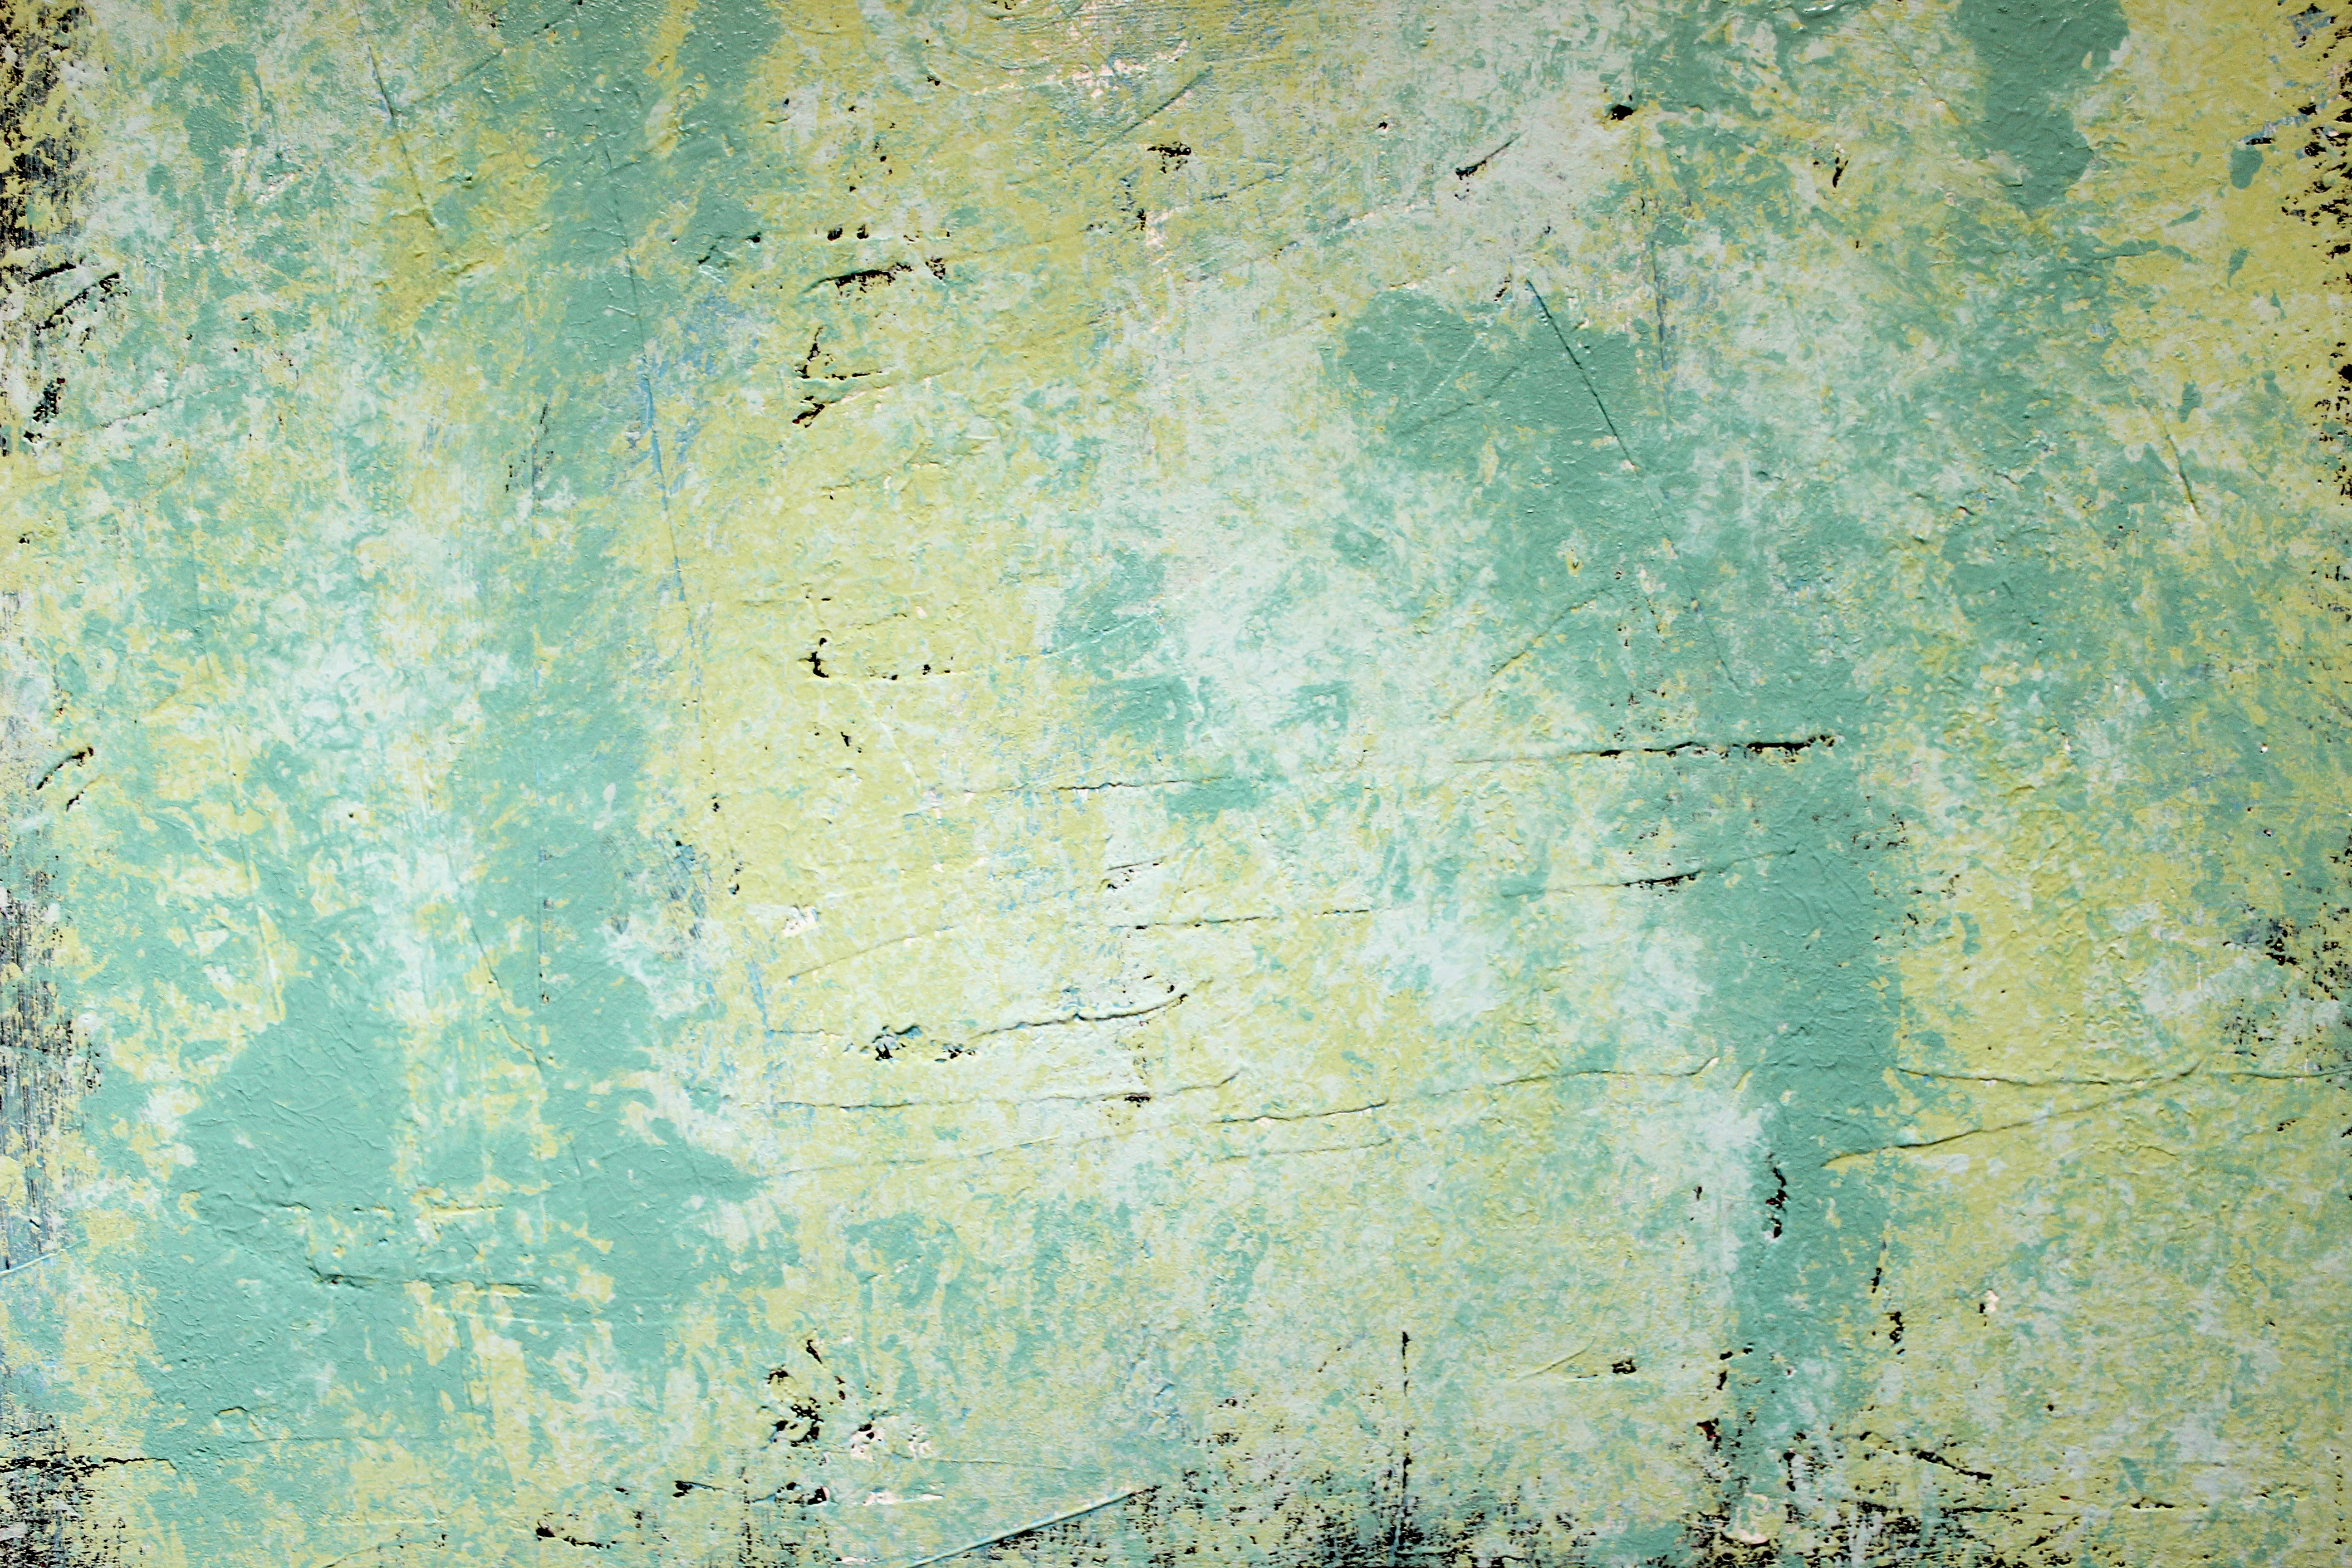 Abstract acrylic paint painting with cool colors and tones of aqua, blue, green, yellow, white, ivory with deep texture in the paint strokes. Nice background or wallpaper image of original artwork and mixed media techniques. Grunge style.